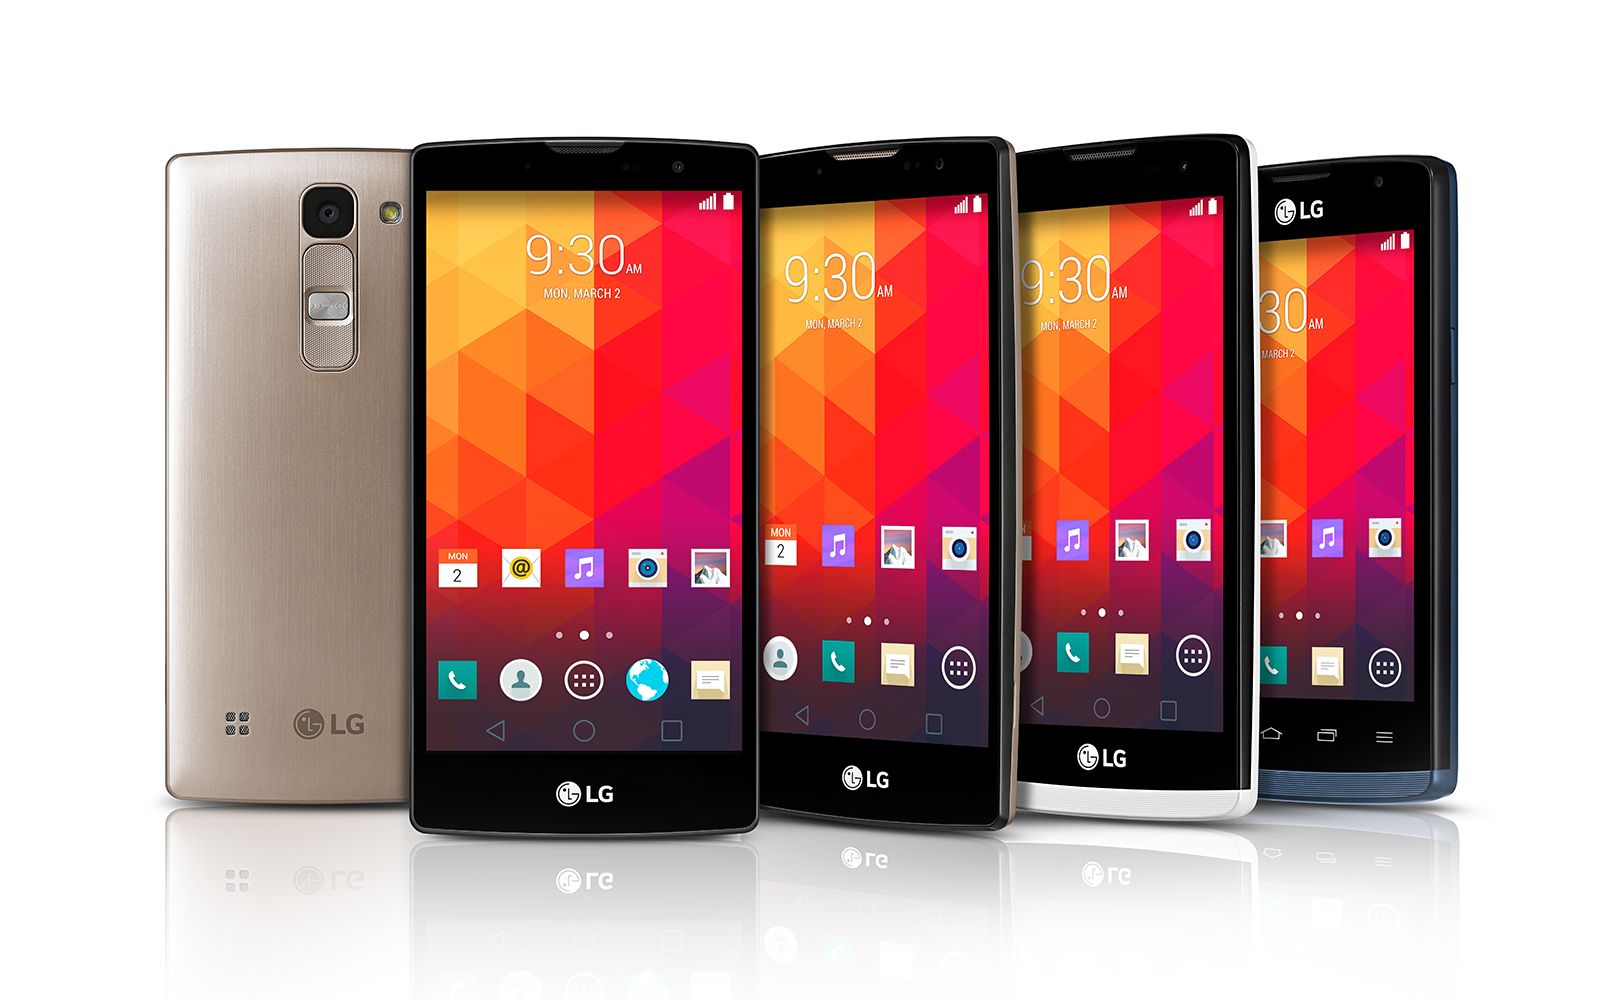 lg brings g3 design and features to mid range magna and spirit lead the pack image 1